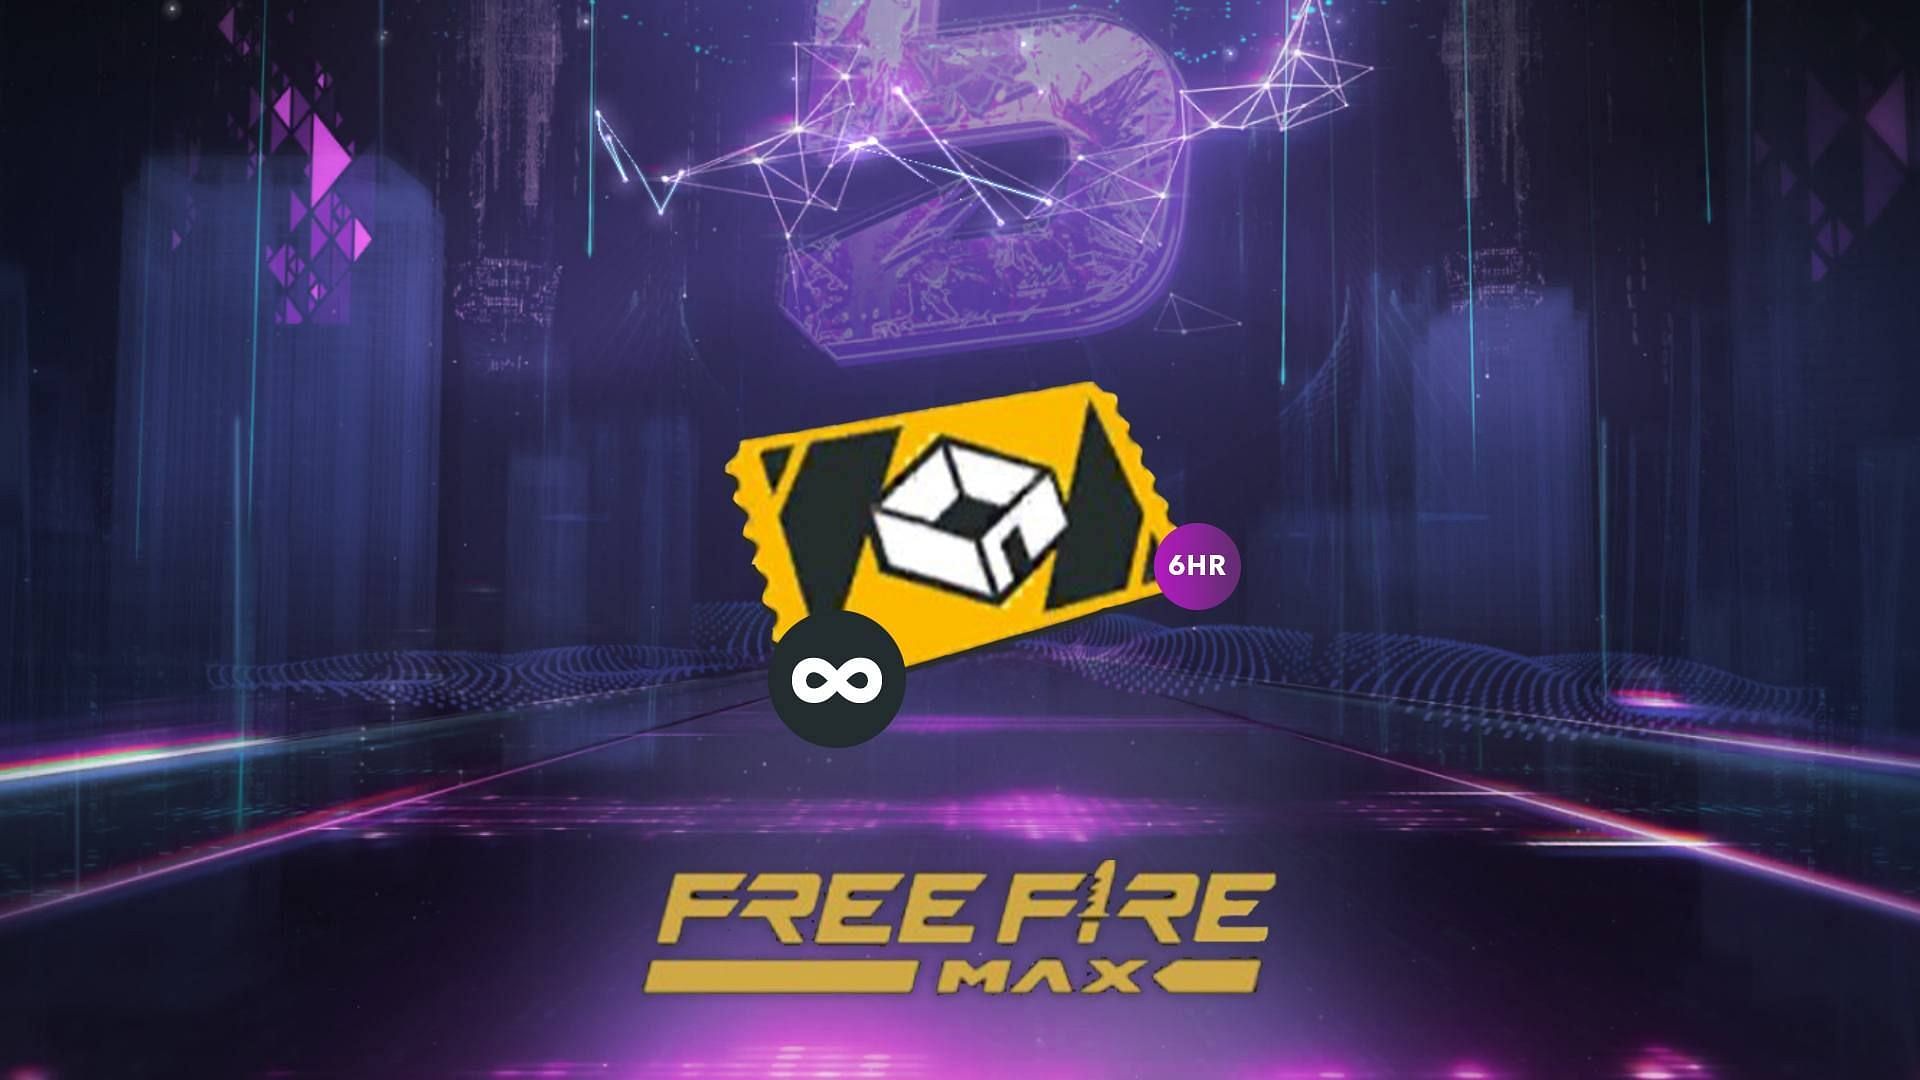 Free Fire MAX fifth anniversary event